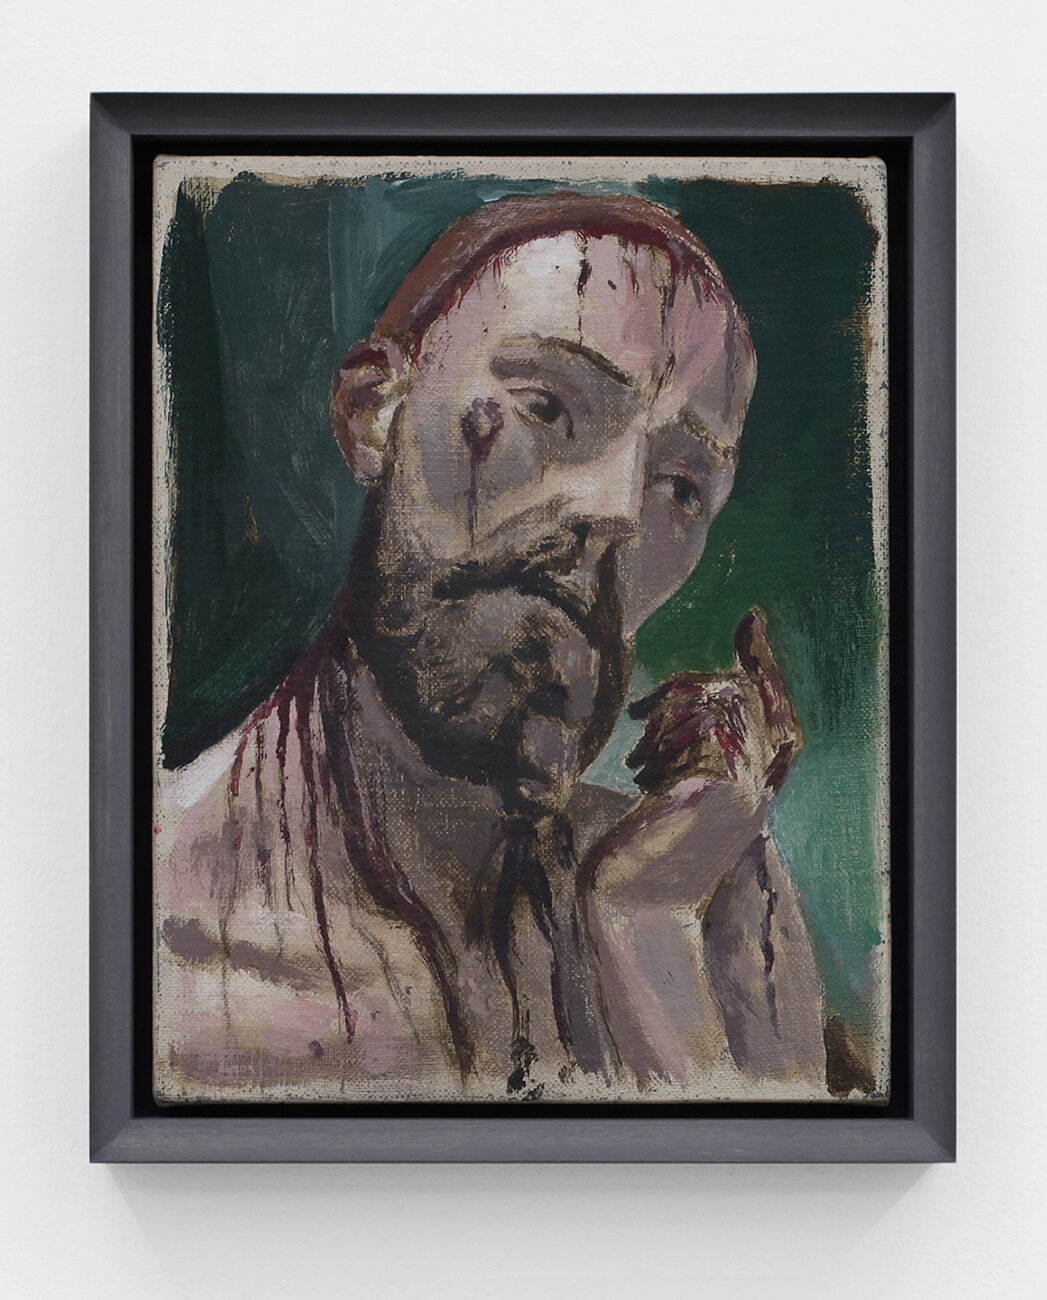  Jesus With the Teeth  2018  Distemper on canvas  9.5 x 7 inches  (24.13 x 17.78 cm)     